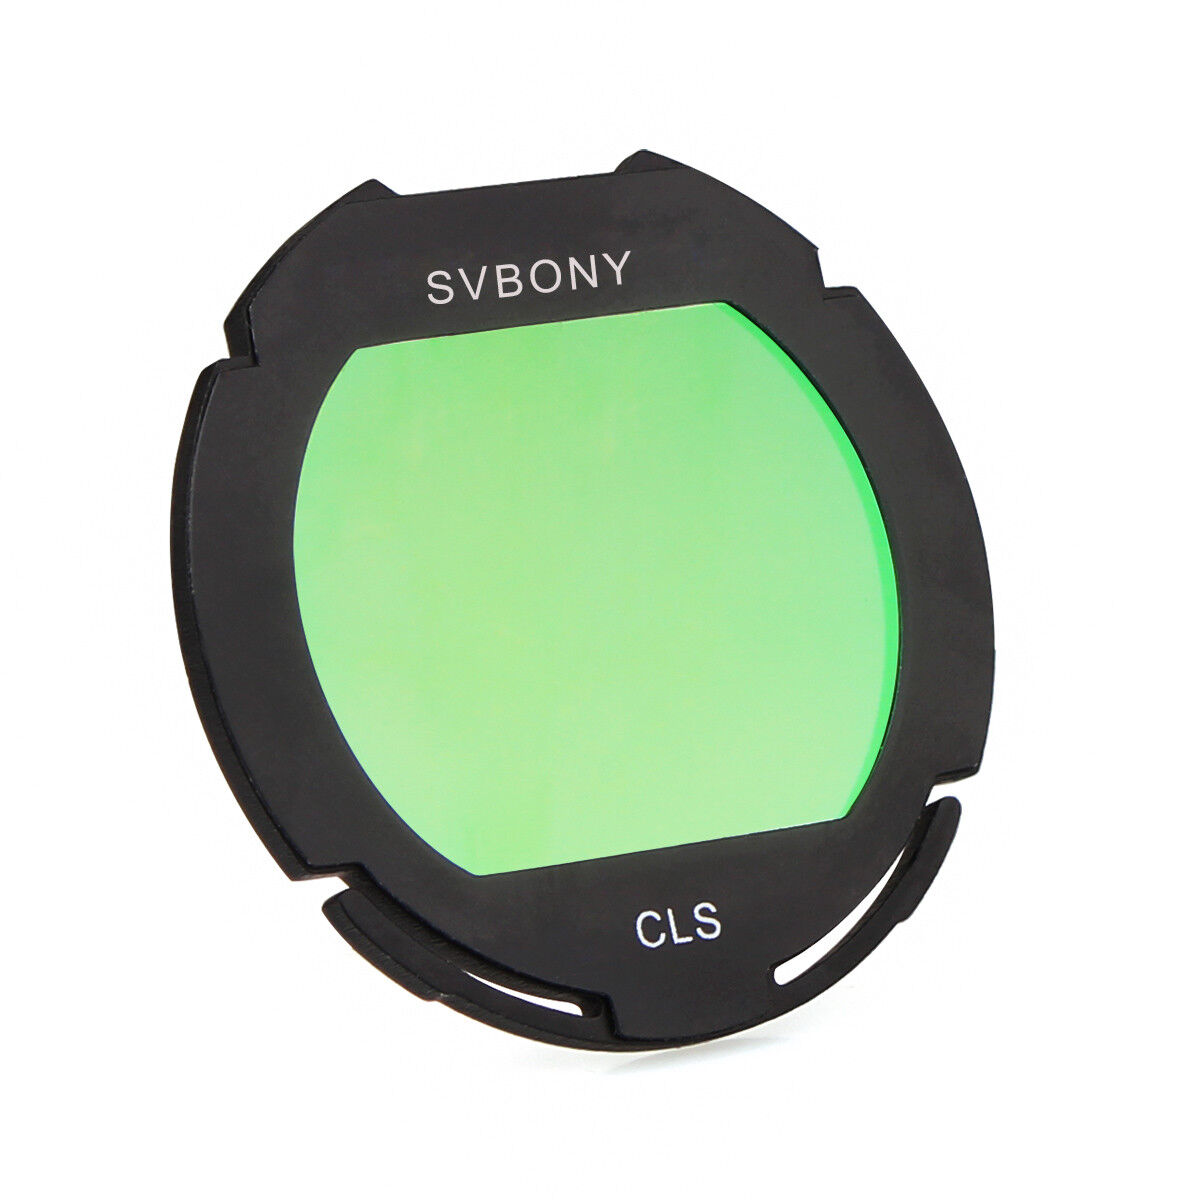 SVBONY CLS Deepsky Clip-on Filter for Canon EOS &Astrophotography telescopes TOP